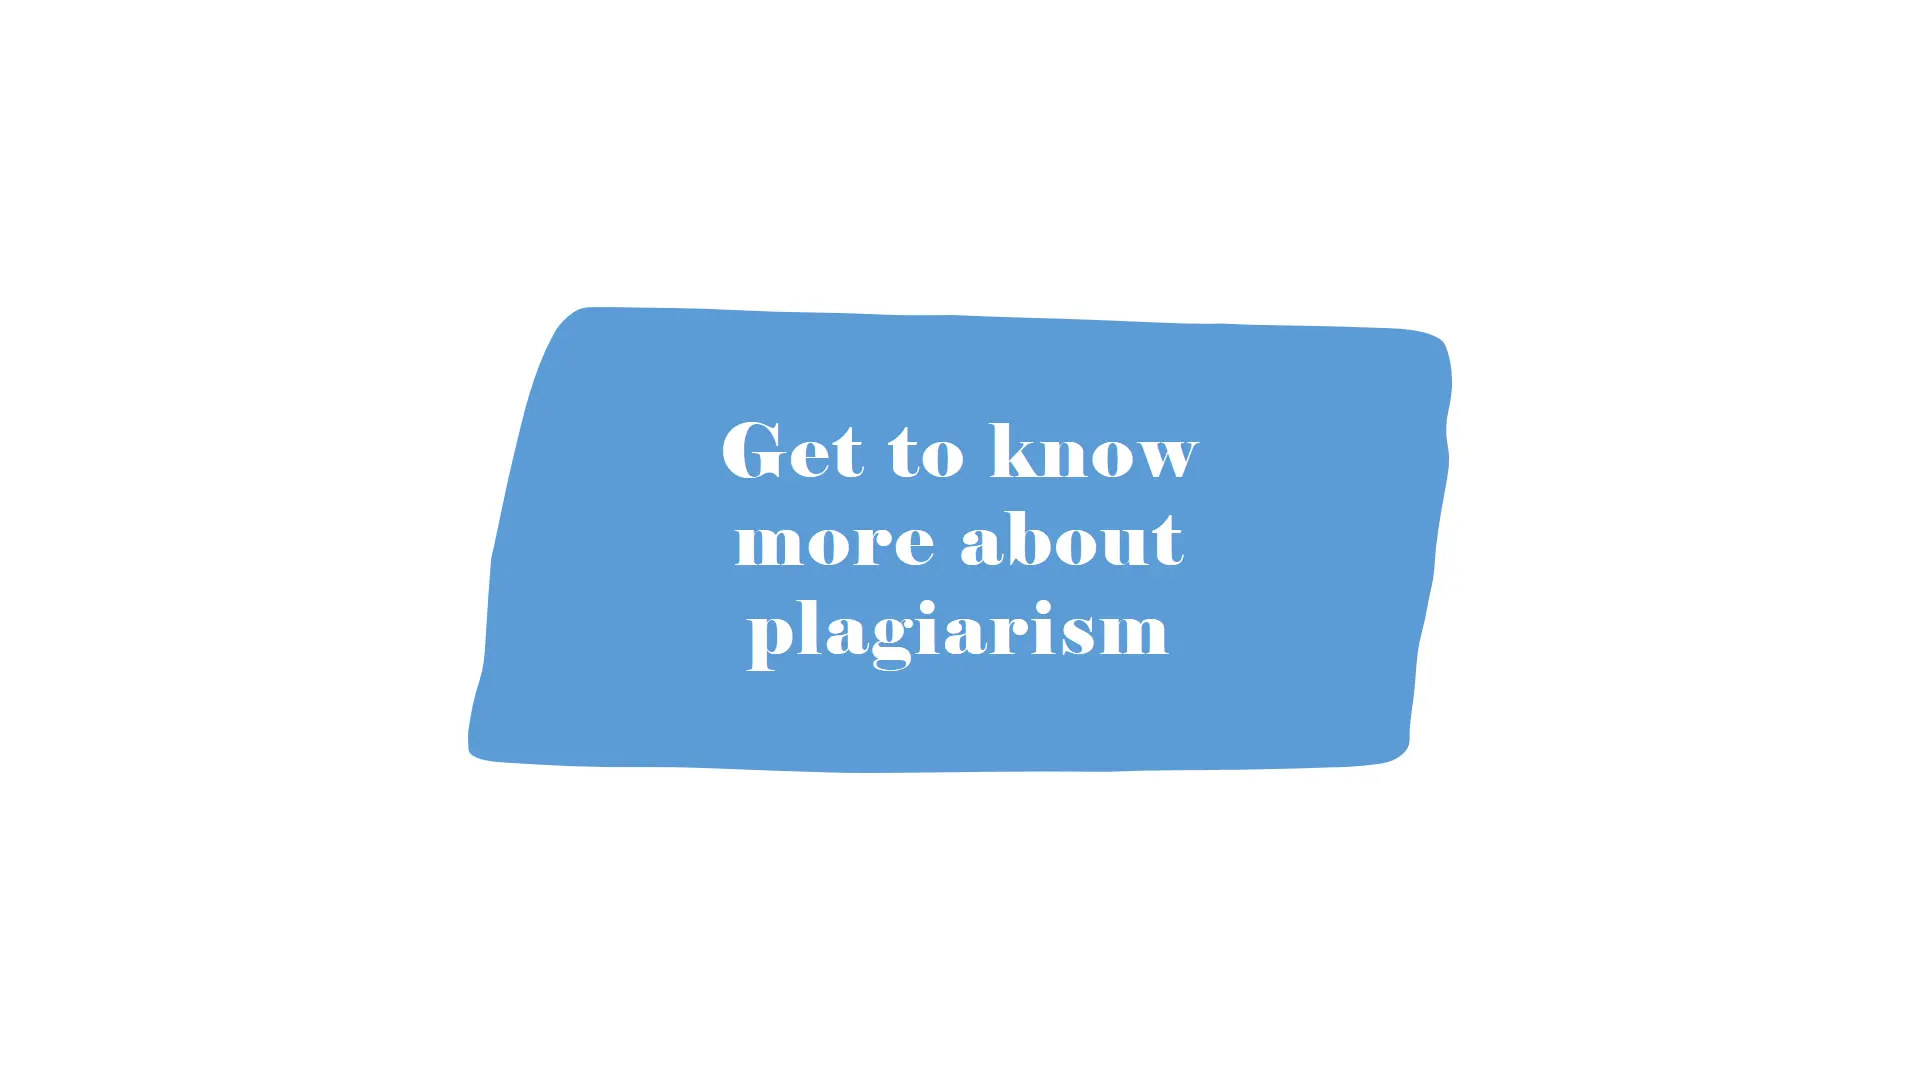 Get to know more about plagiarism